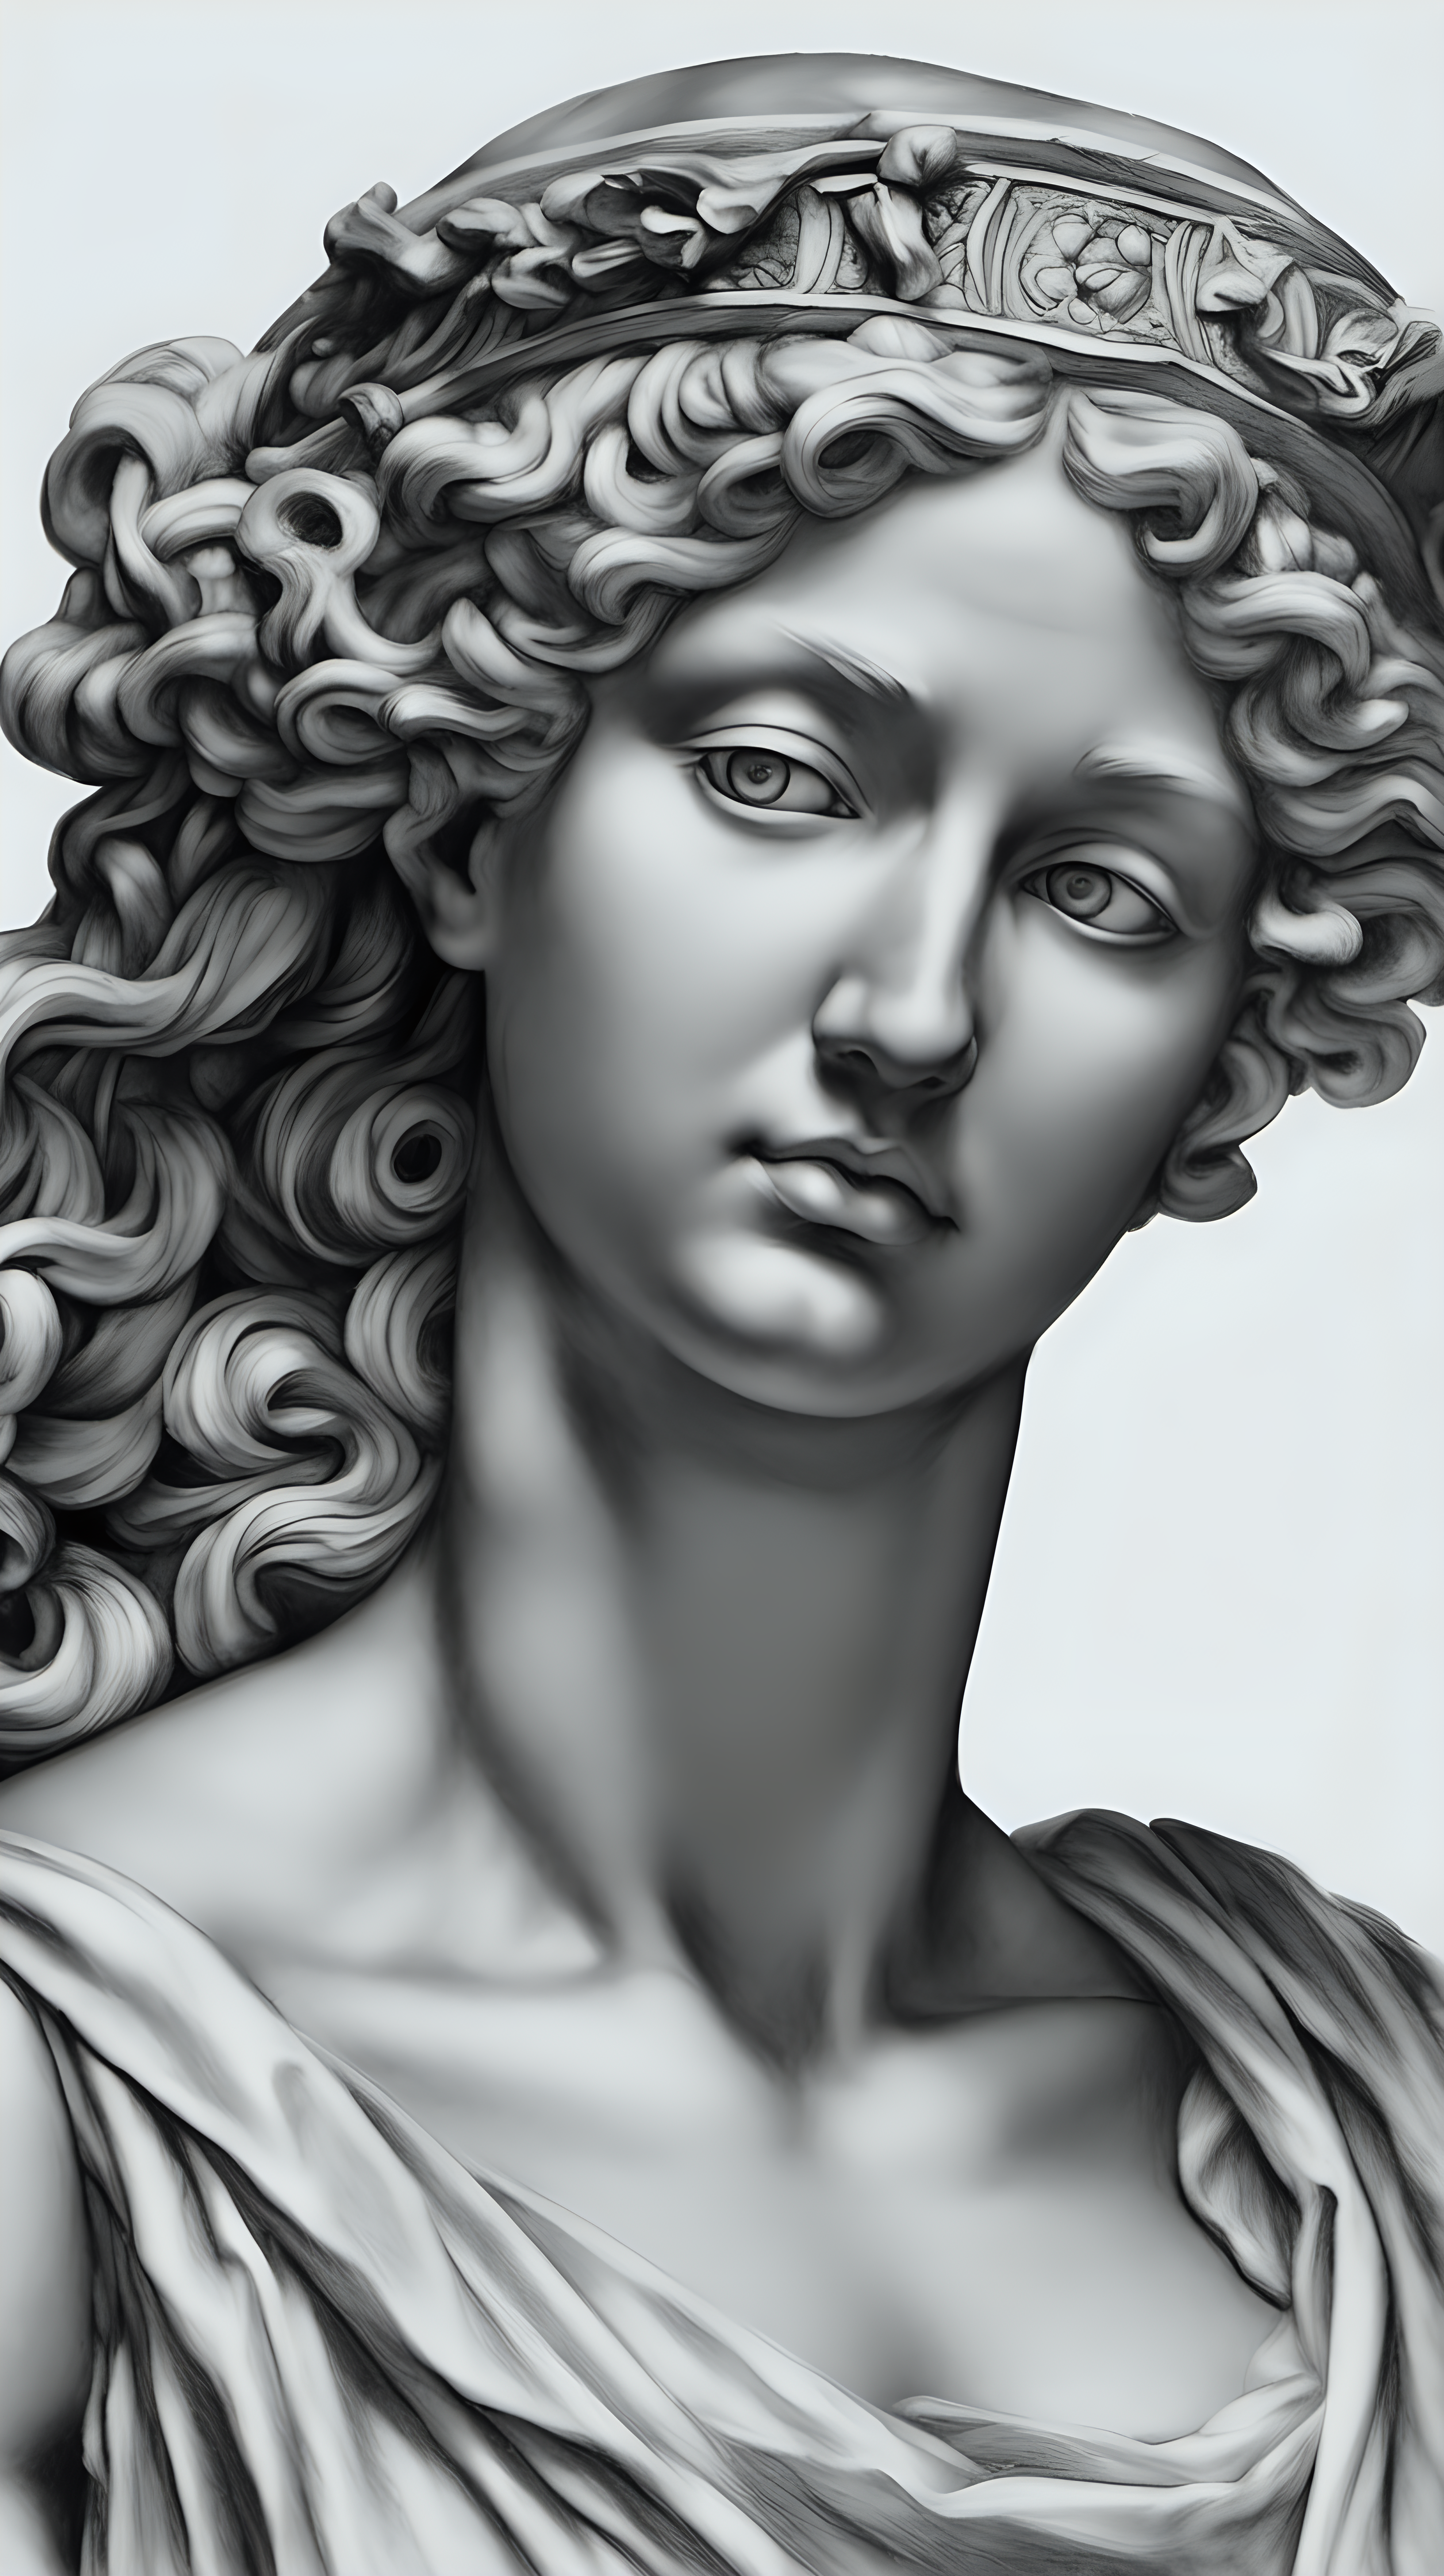 /imagine prompt : a hyper realistic black and gray Michelangelo drawing, feauteted a beautiful aphrodite, godess greek mytology
/describe : whole subjects in the box
-no cut
<background>white papaer
<style>pencil drawing
_ar 9:16